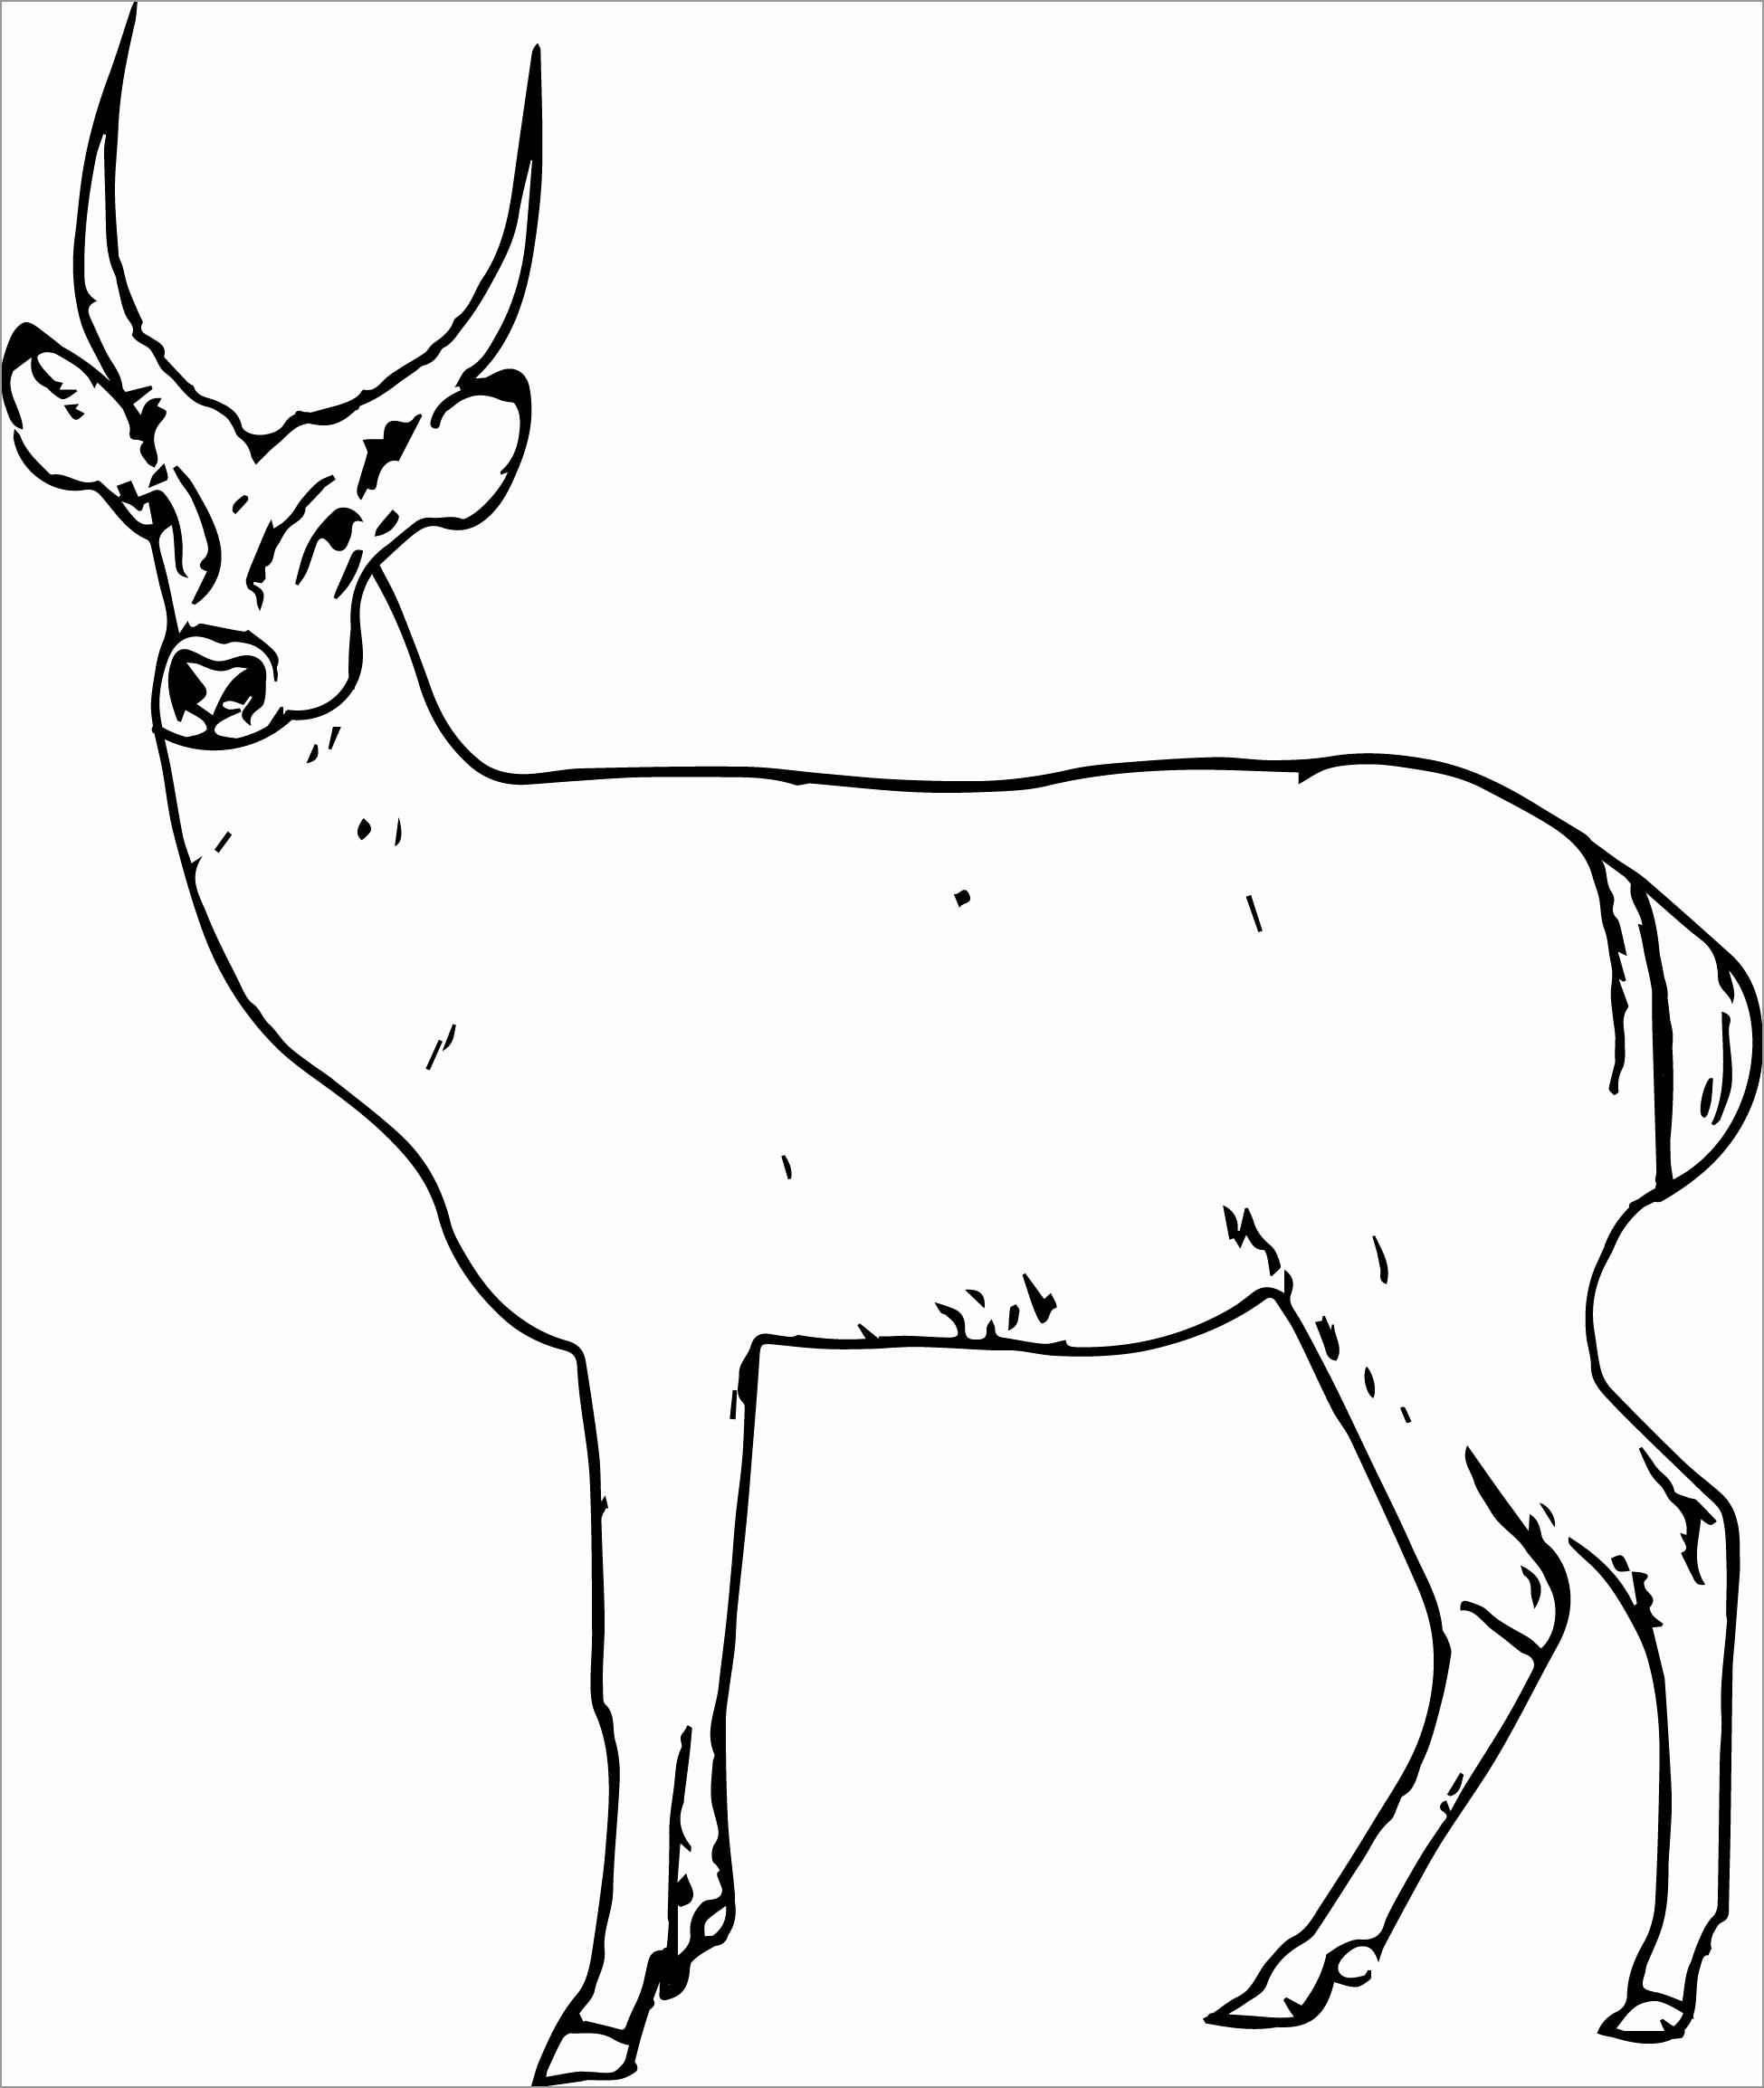 Antelope Spotted Deer Coloring Page